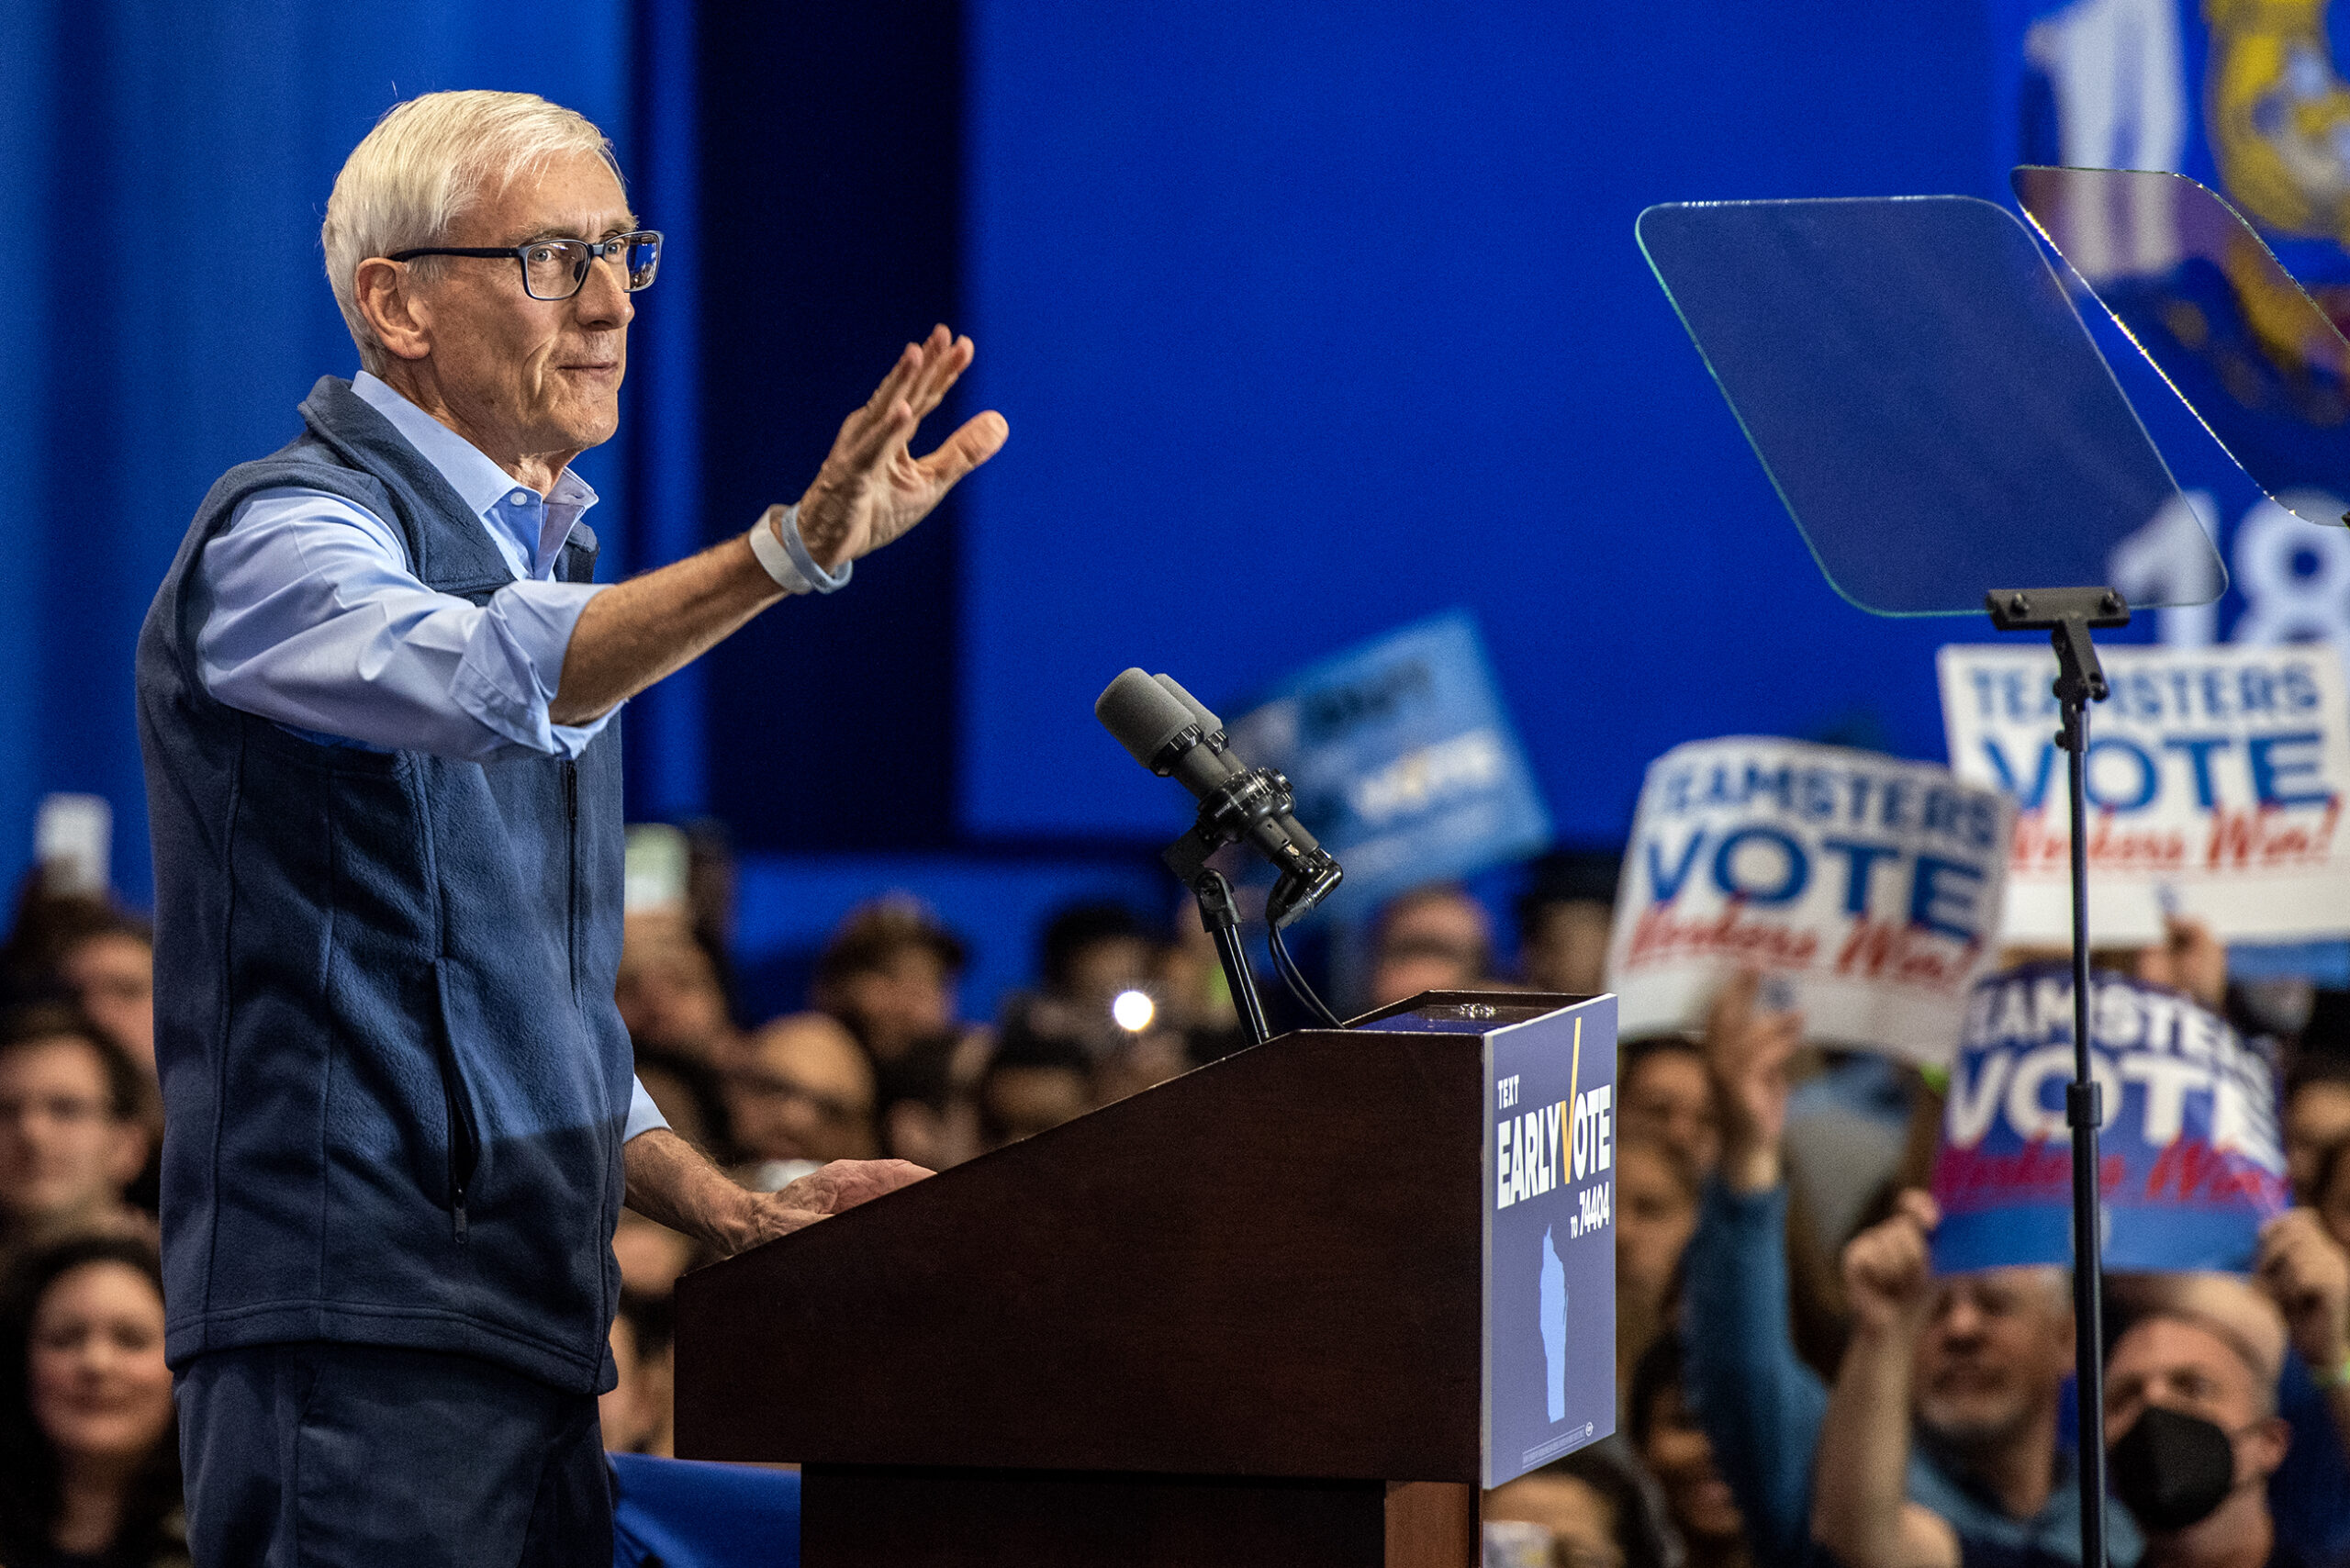 Tony Evers continues to outraise challenger Tim Michels in Wisconsin governor’s race